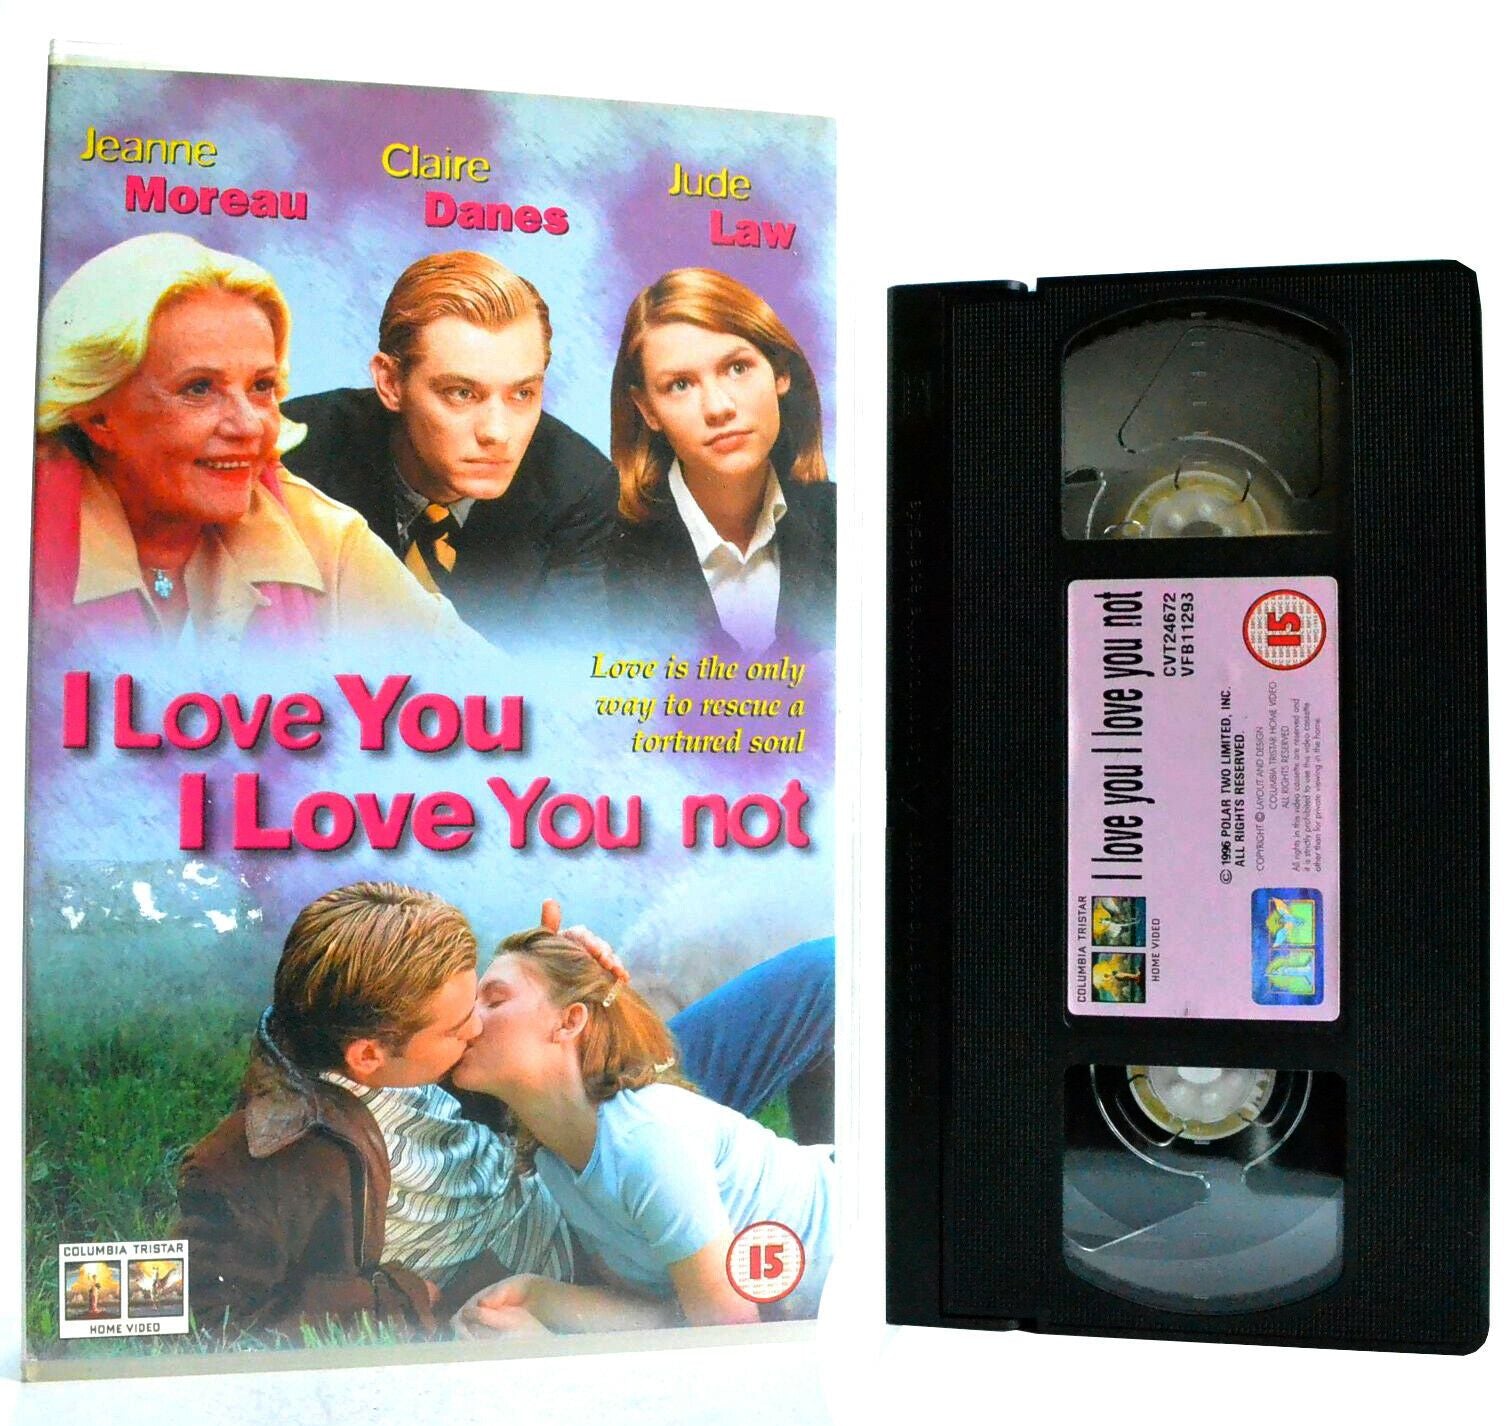 I Love You I Love You Not: Romantic Drama (1996) - Large Box - Jude Law - VHS-